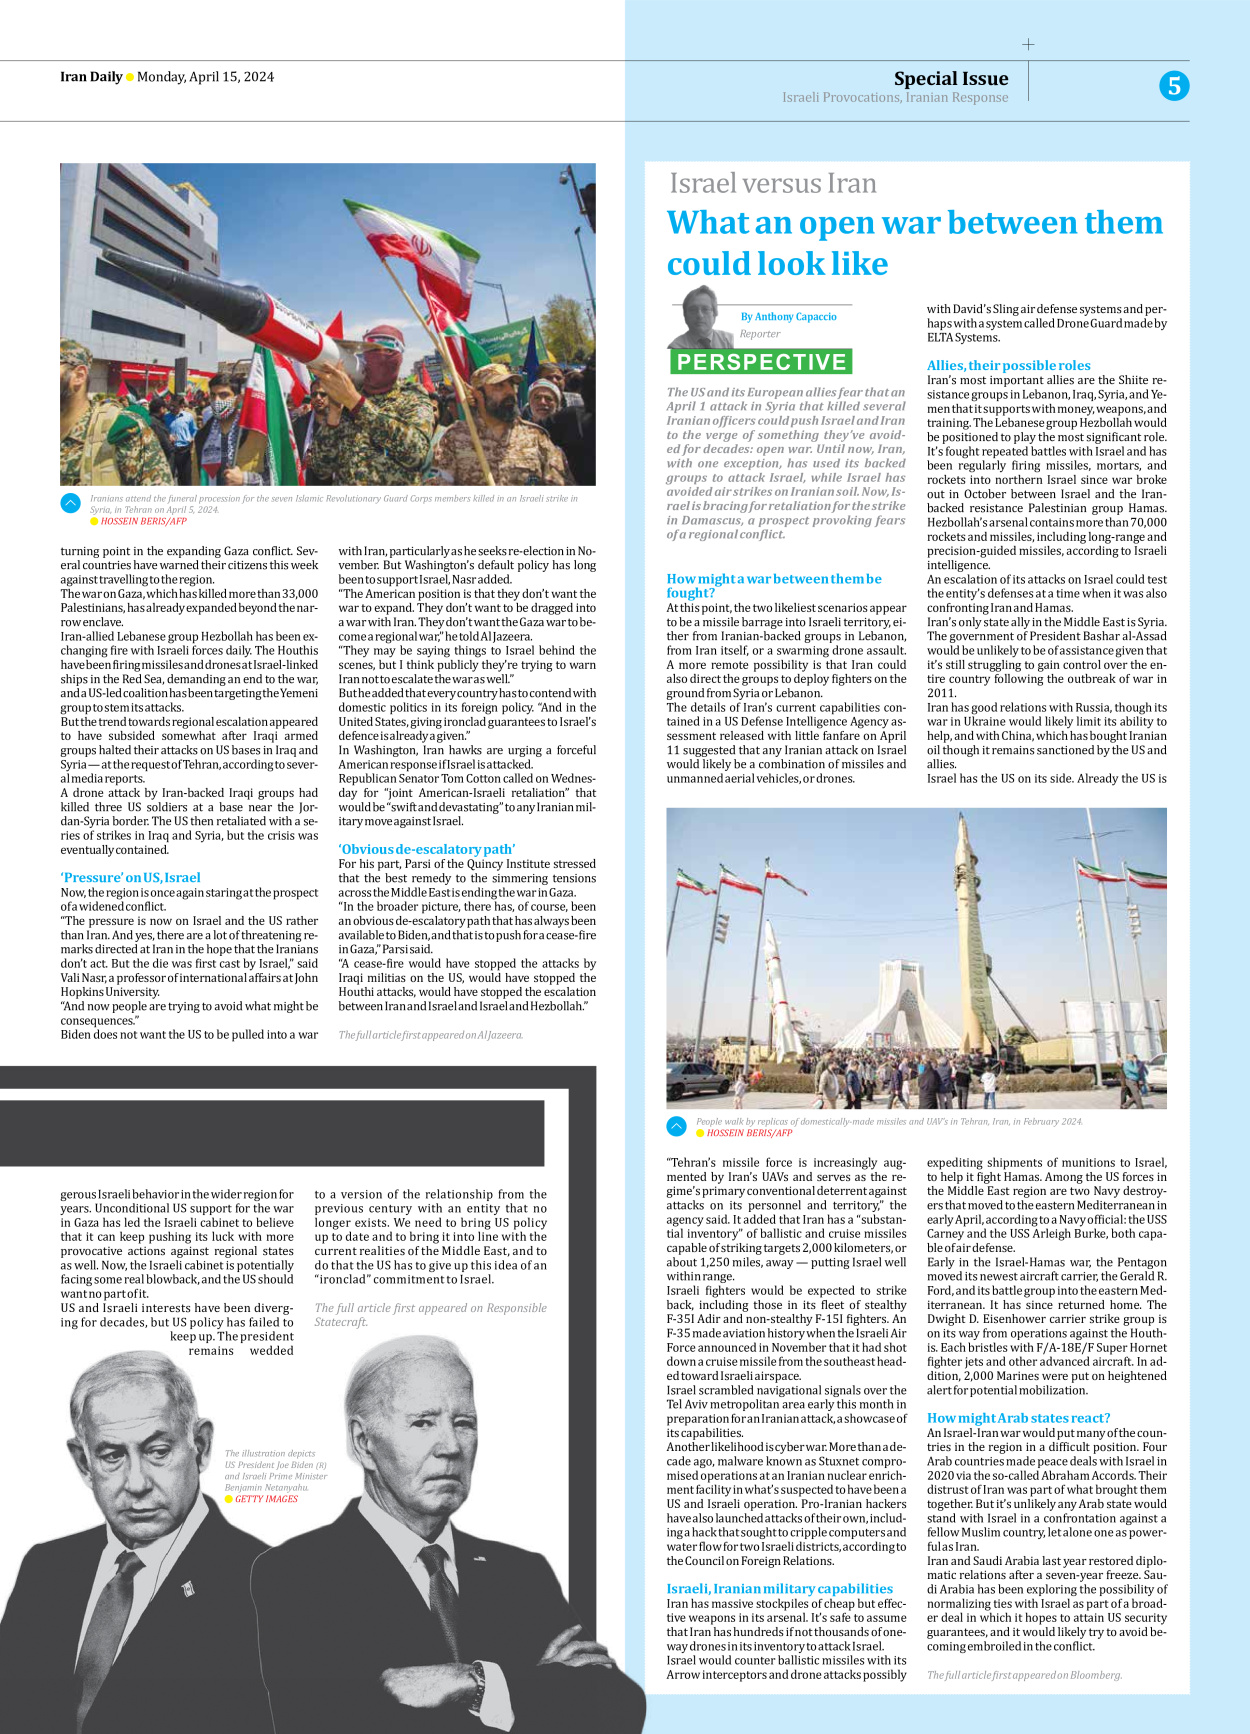 Iran Daily - Number Seven Thousand Five Hundred and Thirty Three - 15 April 2024 - Page 5